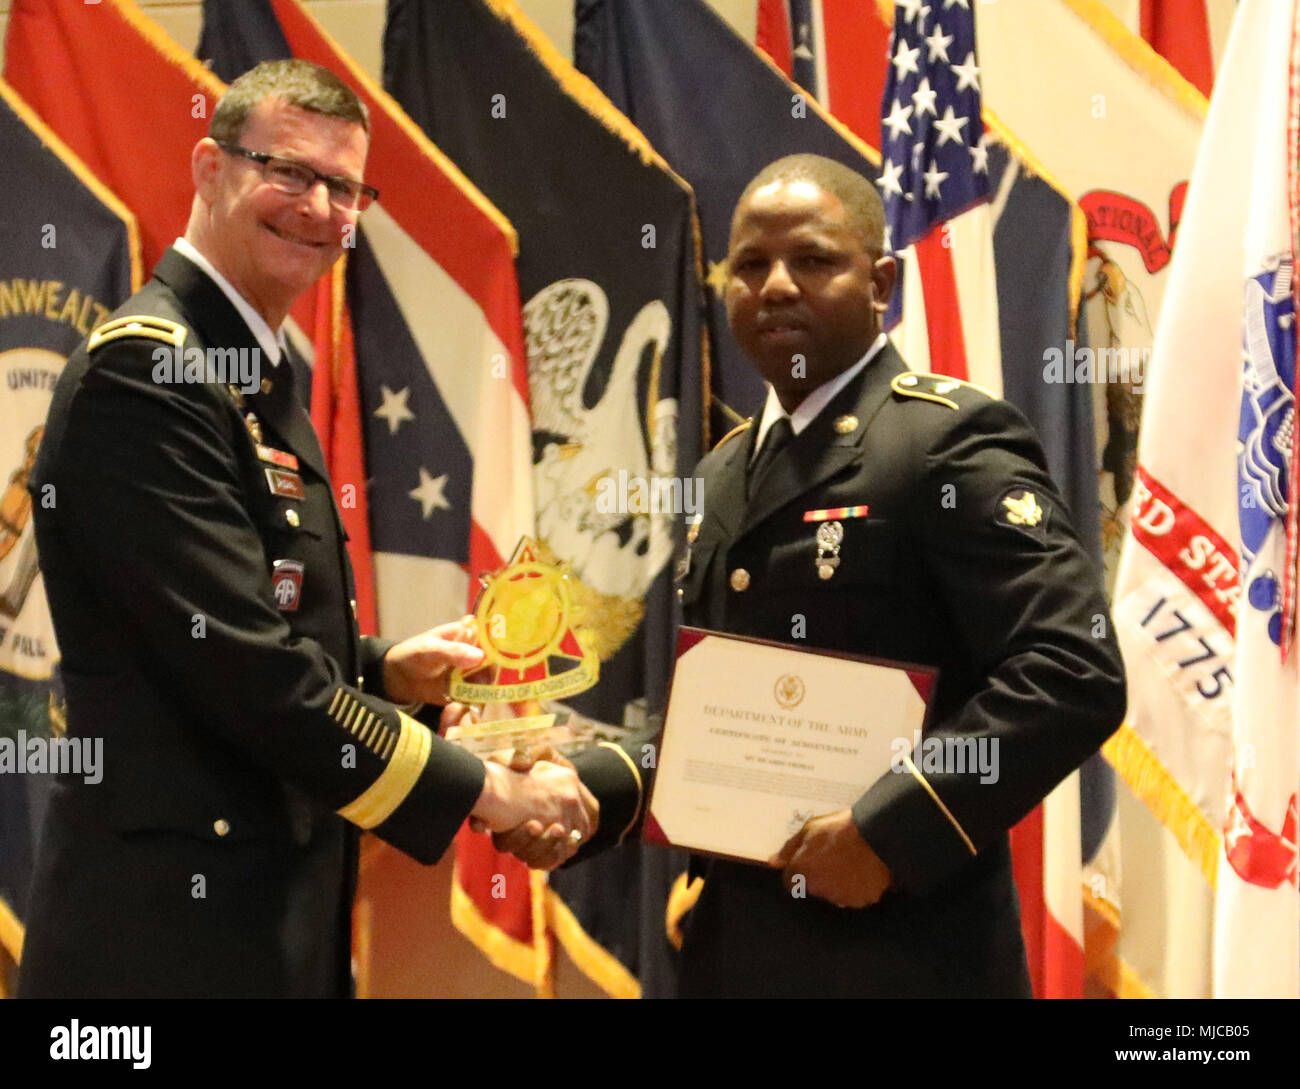 Brig. Gen. Jeffrey W. Drushal (left), chief of transportation and commandant, U.S. Army Transportation School, presented the best 2017 Transportation Reserve Soldier, Ricardo Thomas, 840th Transportation Battalion, Camp Arifjan, Kuwait, during the U.S. Army Transportation Corps annual regimental honors ceremony May 1 at Wylie Hall on Fort Lee, Virginia. The ceremony was held as part of the U.S. Army Combined Arms Support Command Sustainment Week branch day activities. Stock Photo